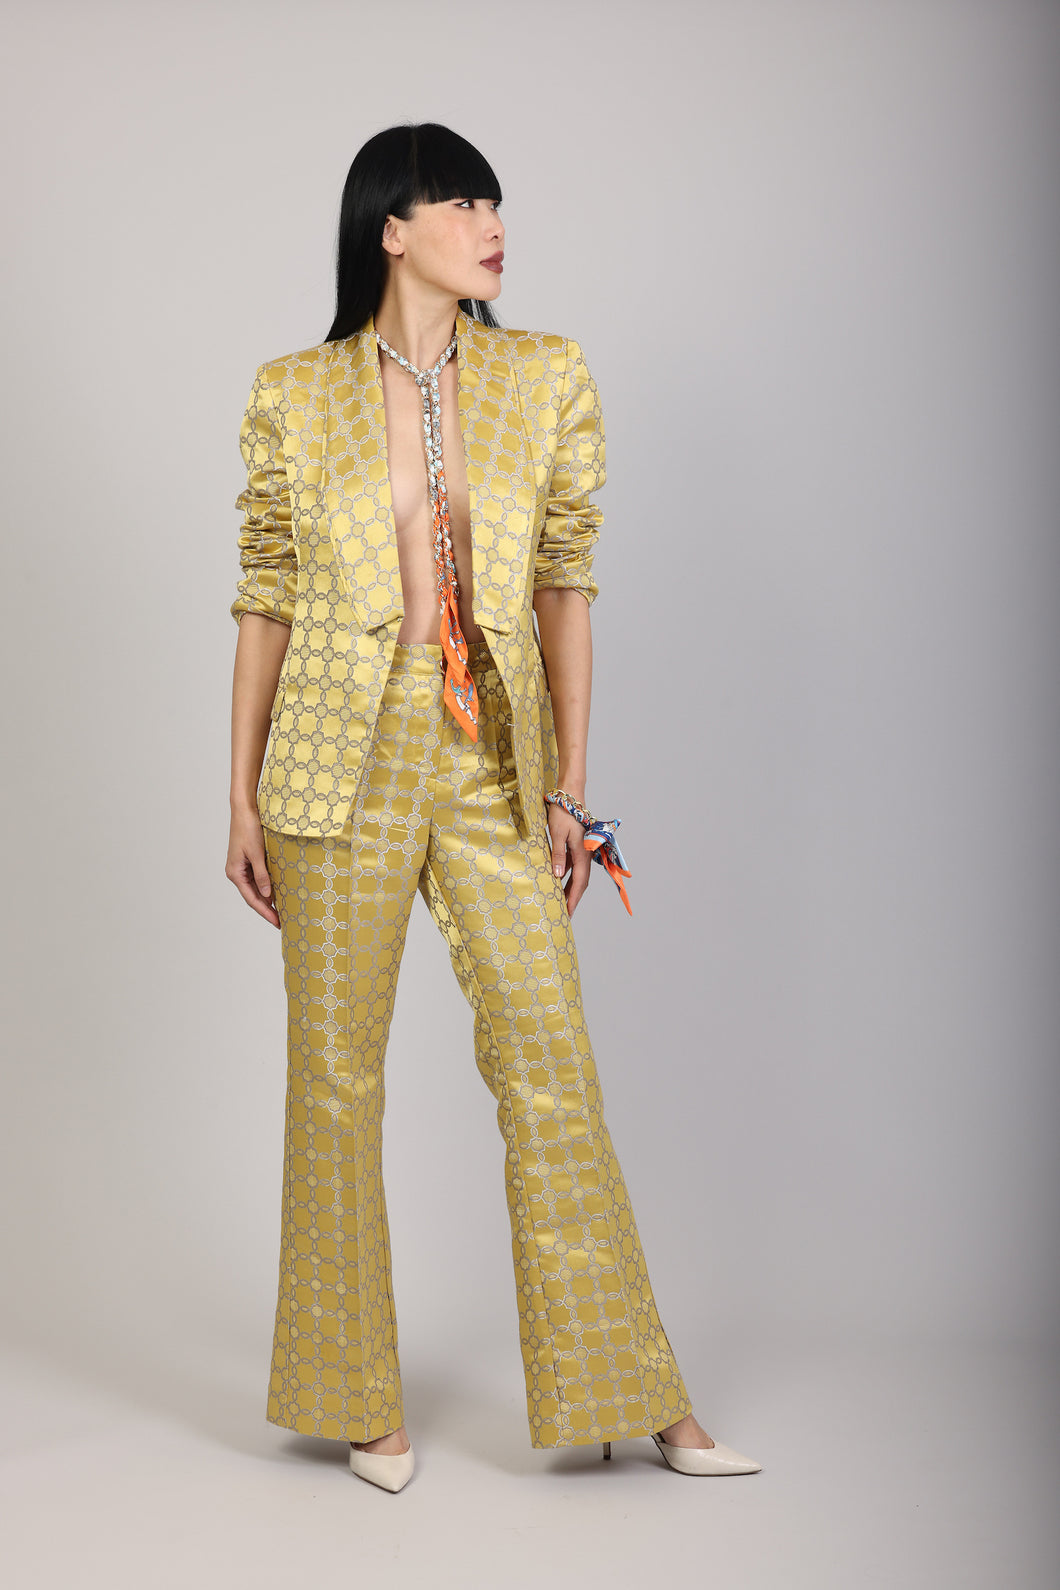 Sunkissed Gold Suit Jacket